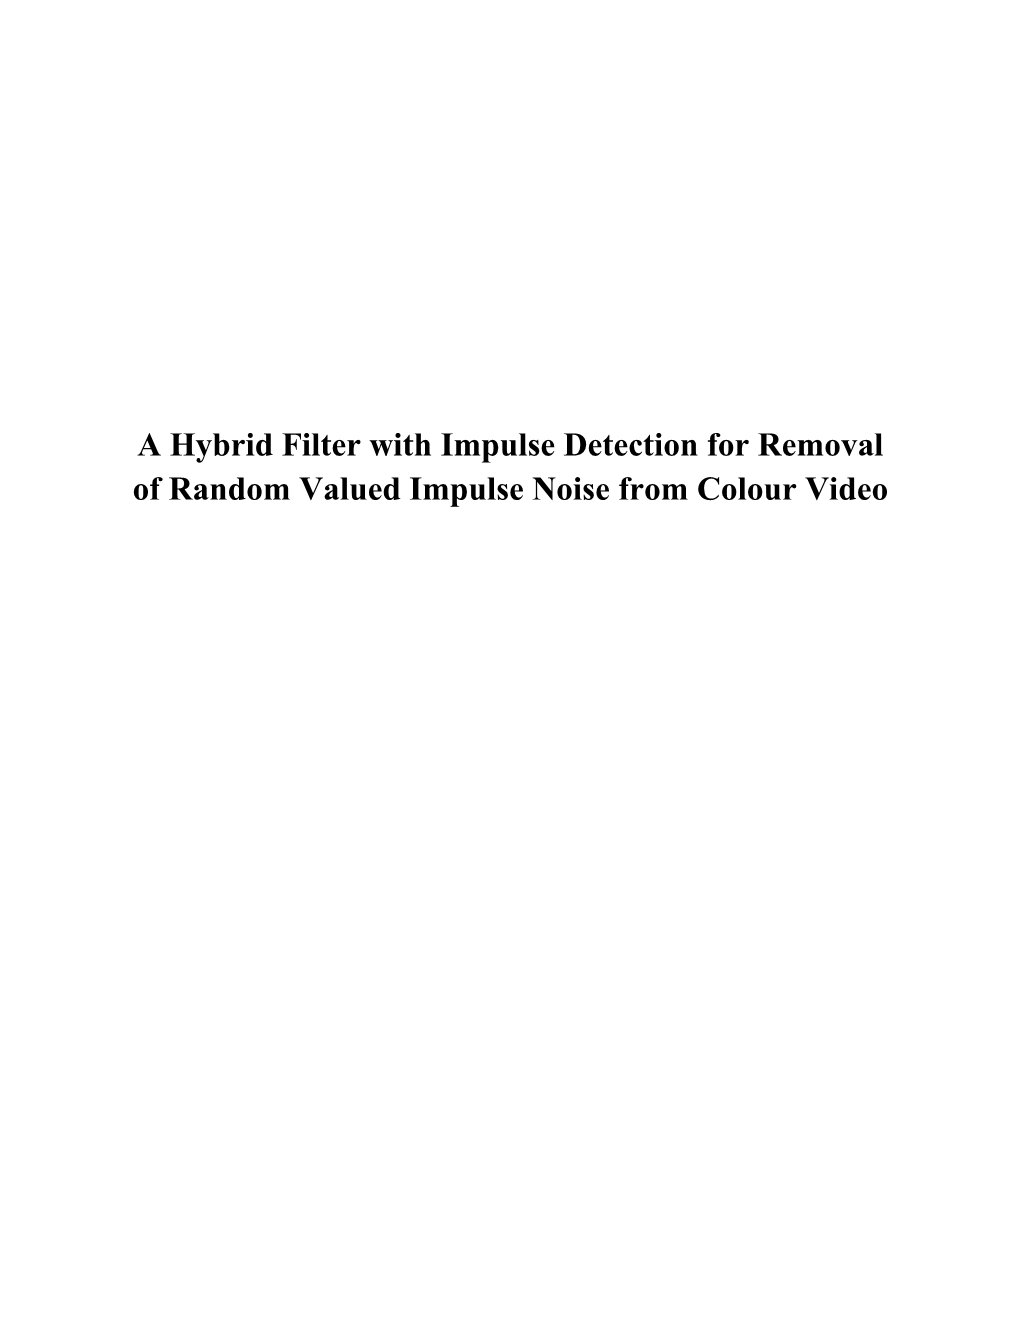 A Hybrid Filter with Impulse Detection for Removal of Random Valued Impulse Noise From